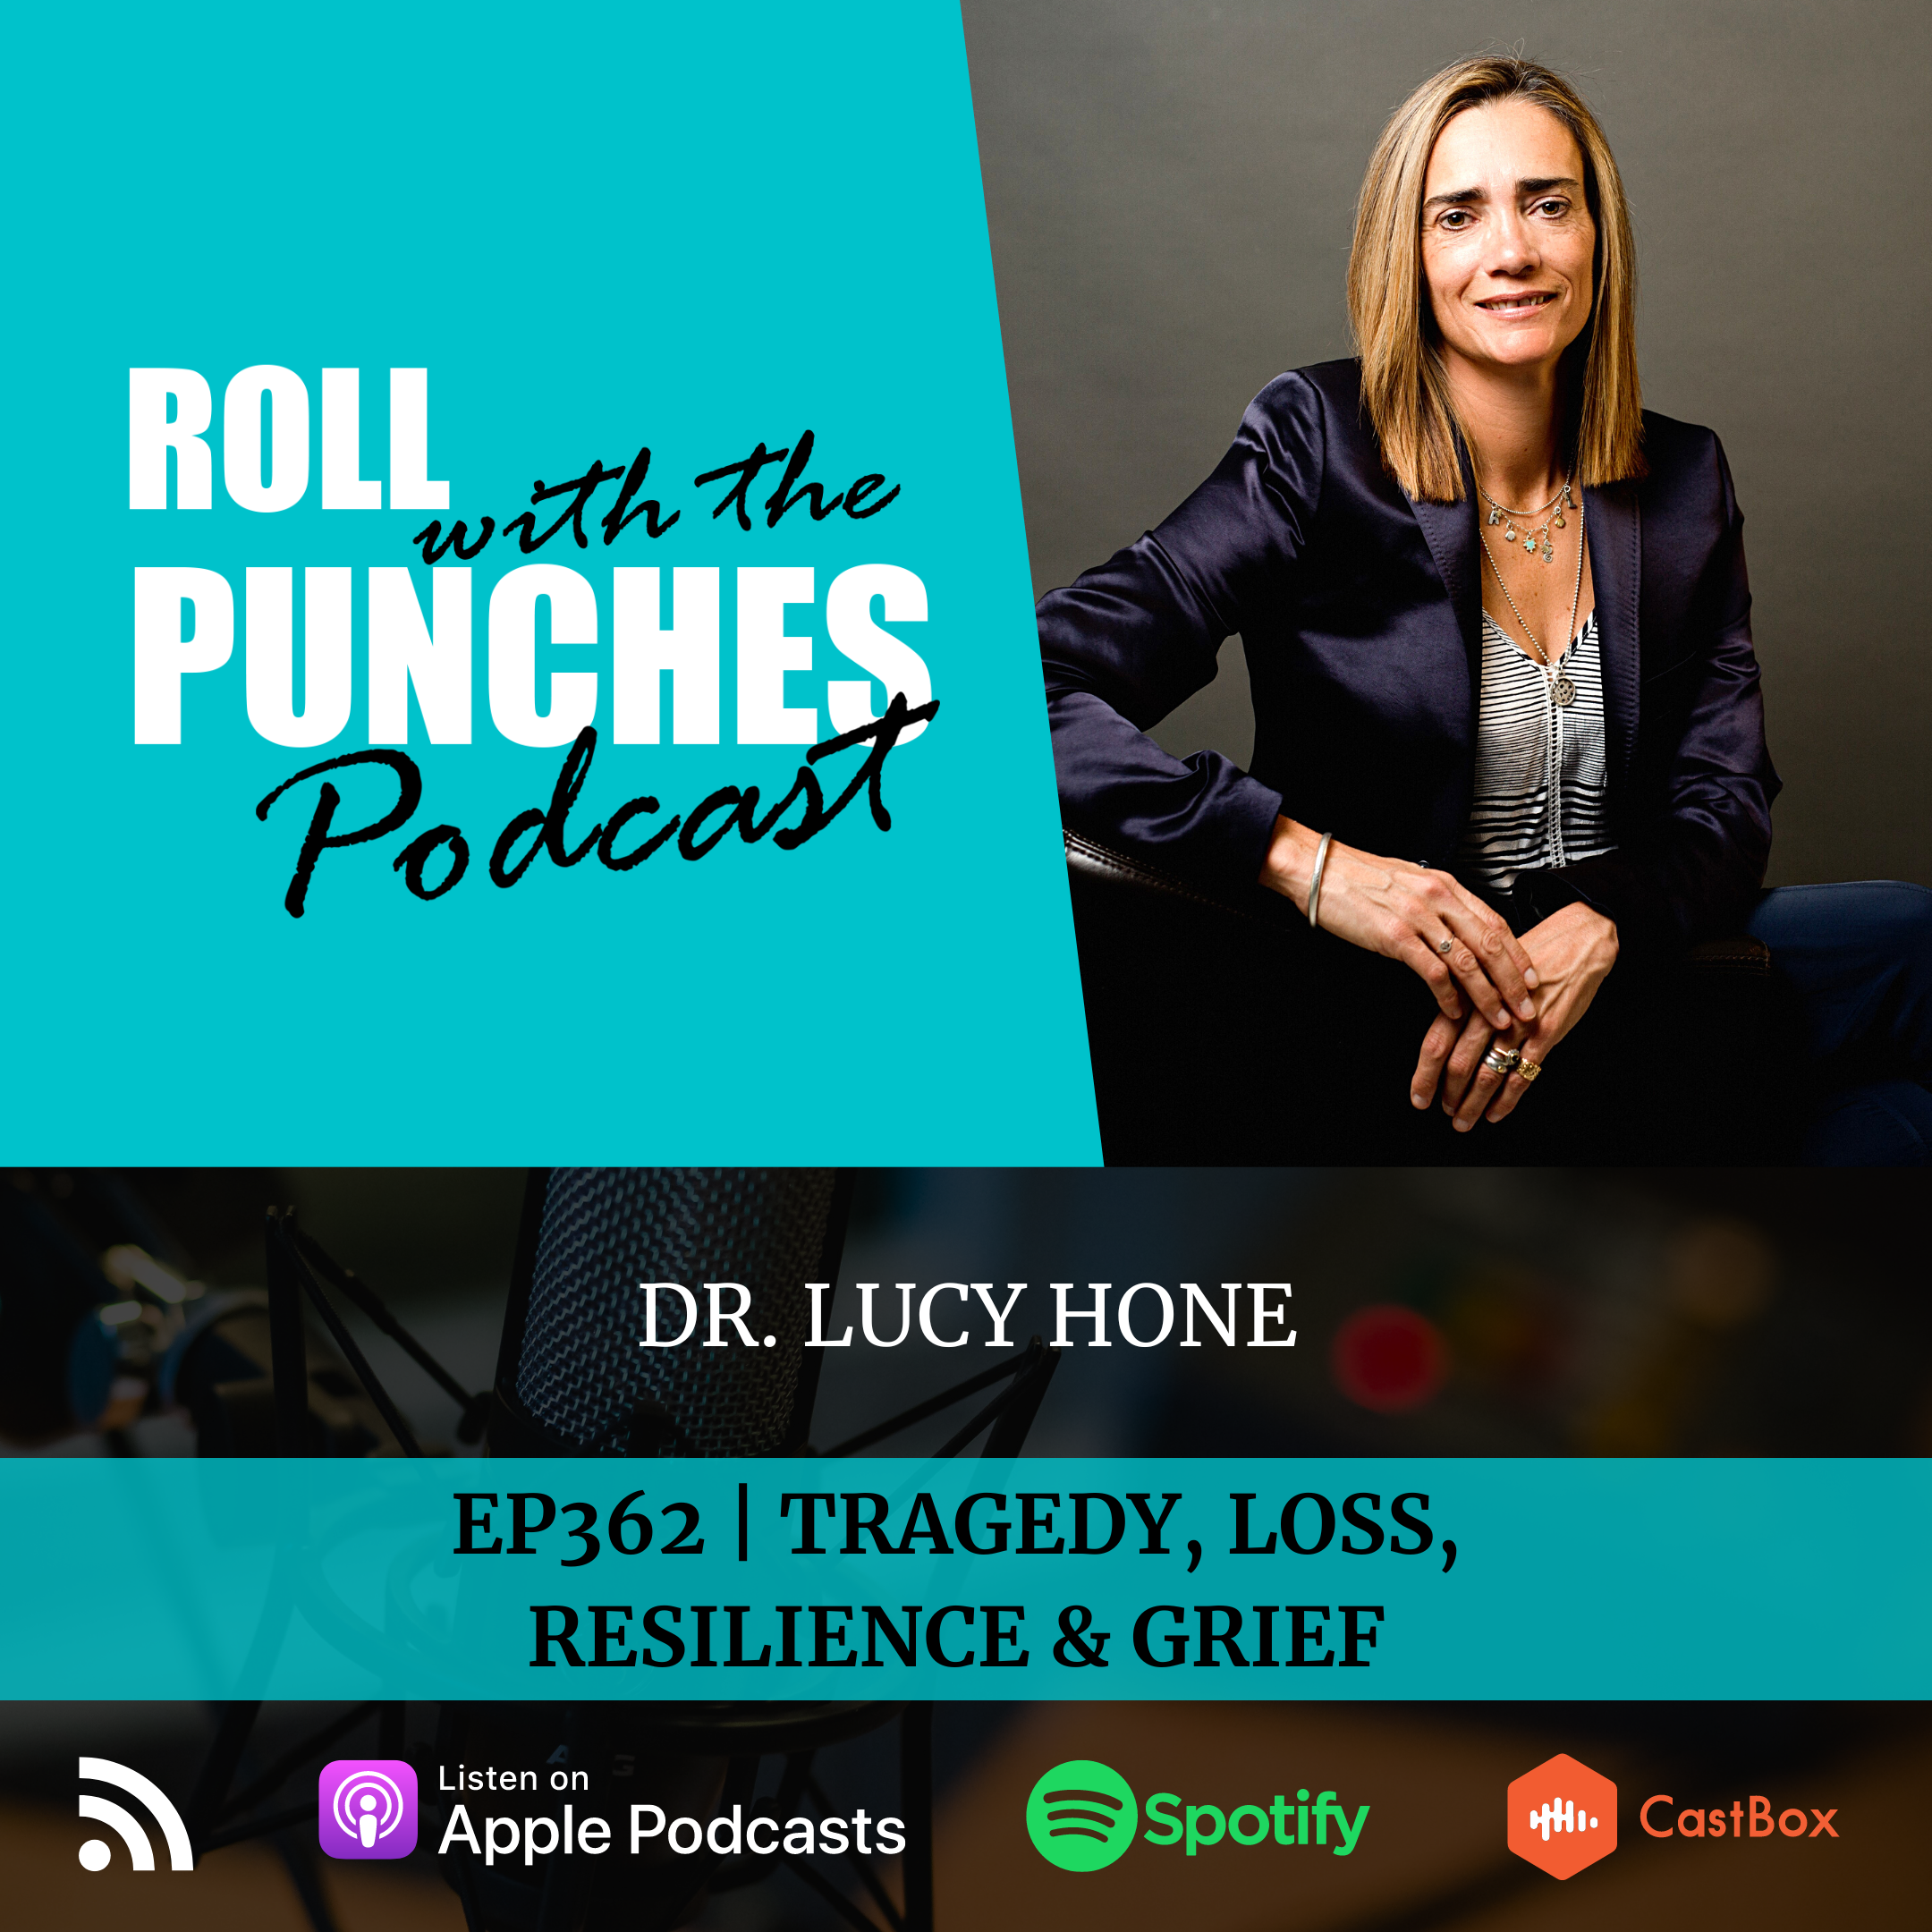 Tragedy, Loss, Resilience & Grief | Dr. Lucy Hone - 362